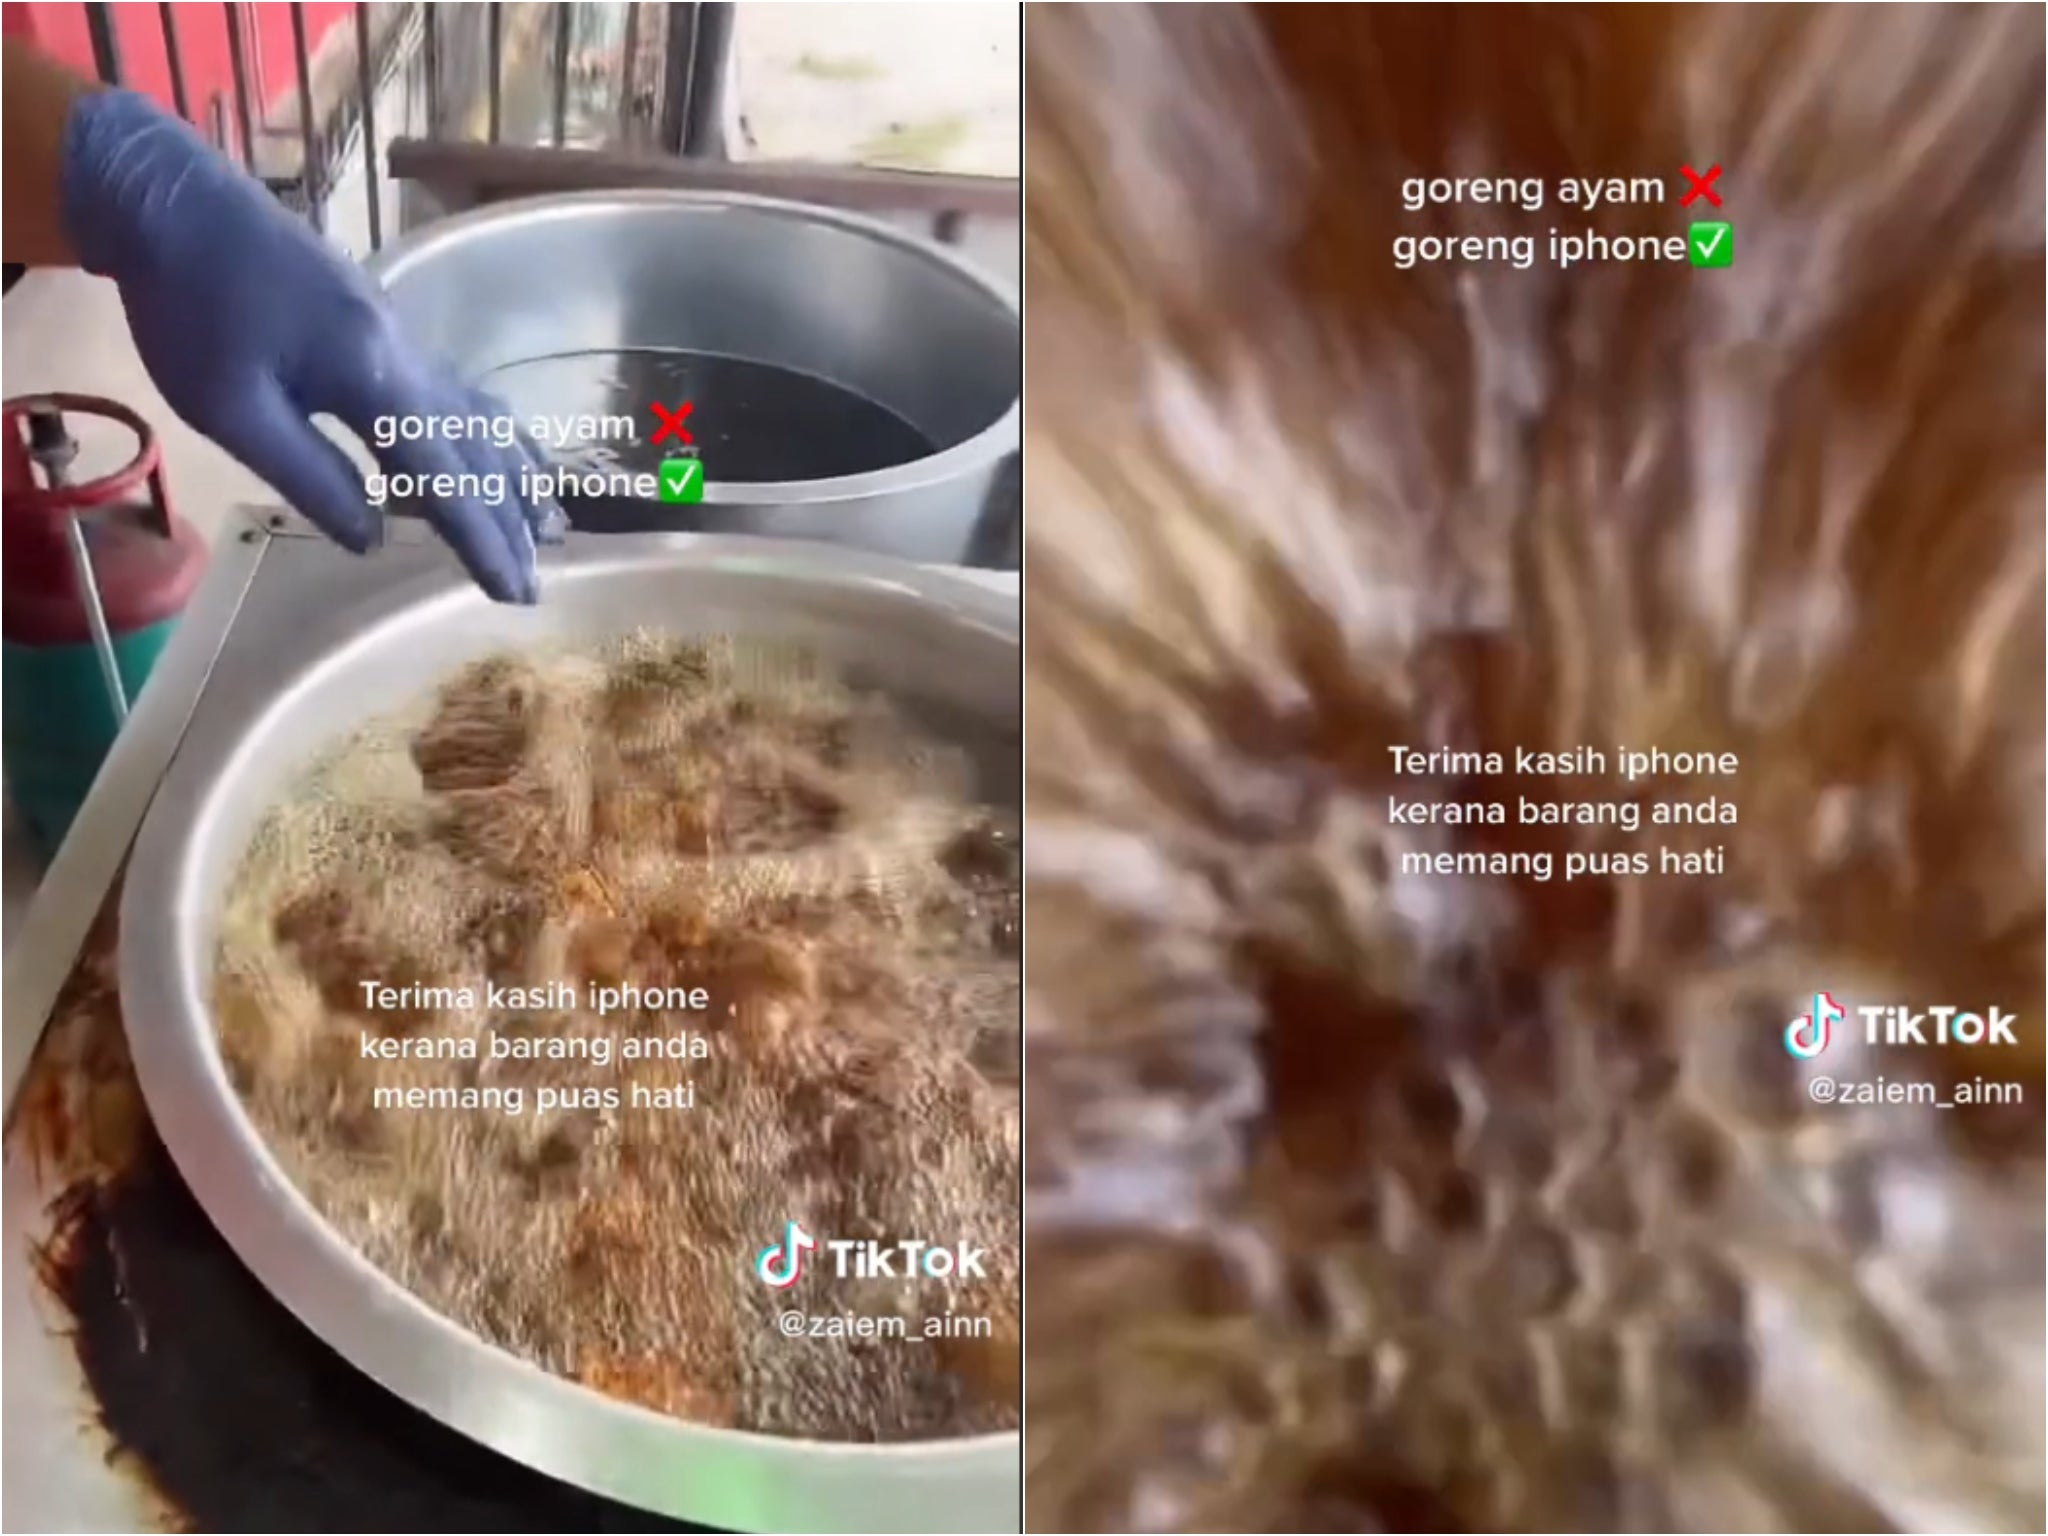 A TikTok user accidentally dropped his iPhone into a pot of boiling oil